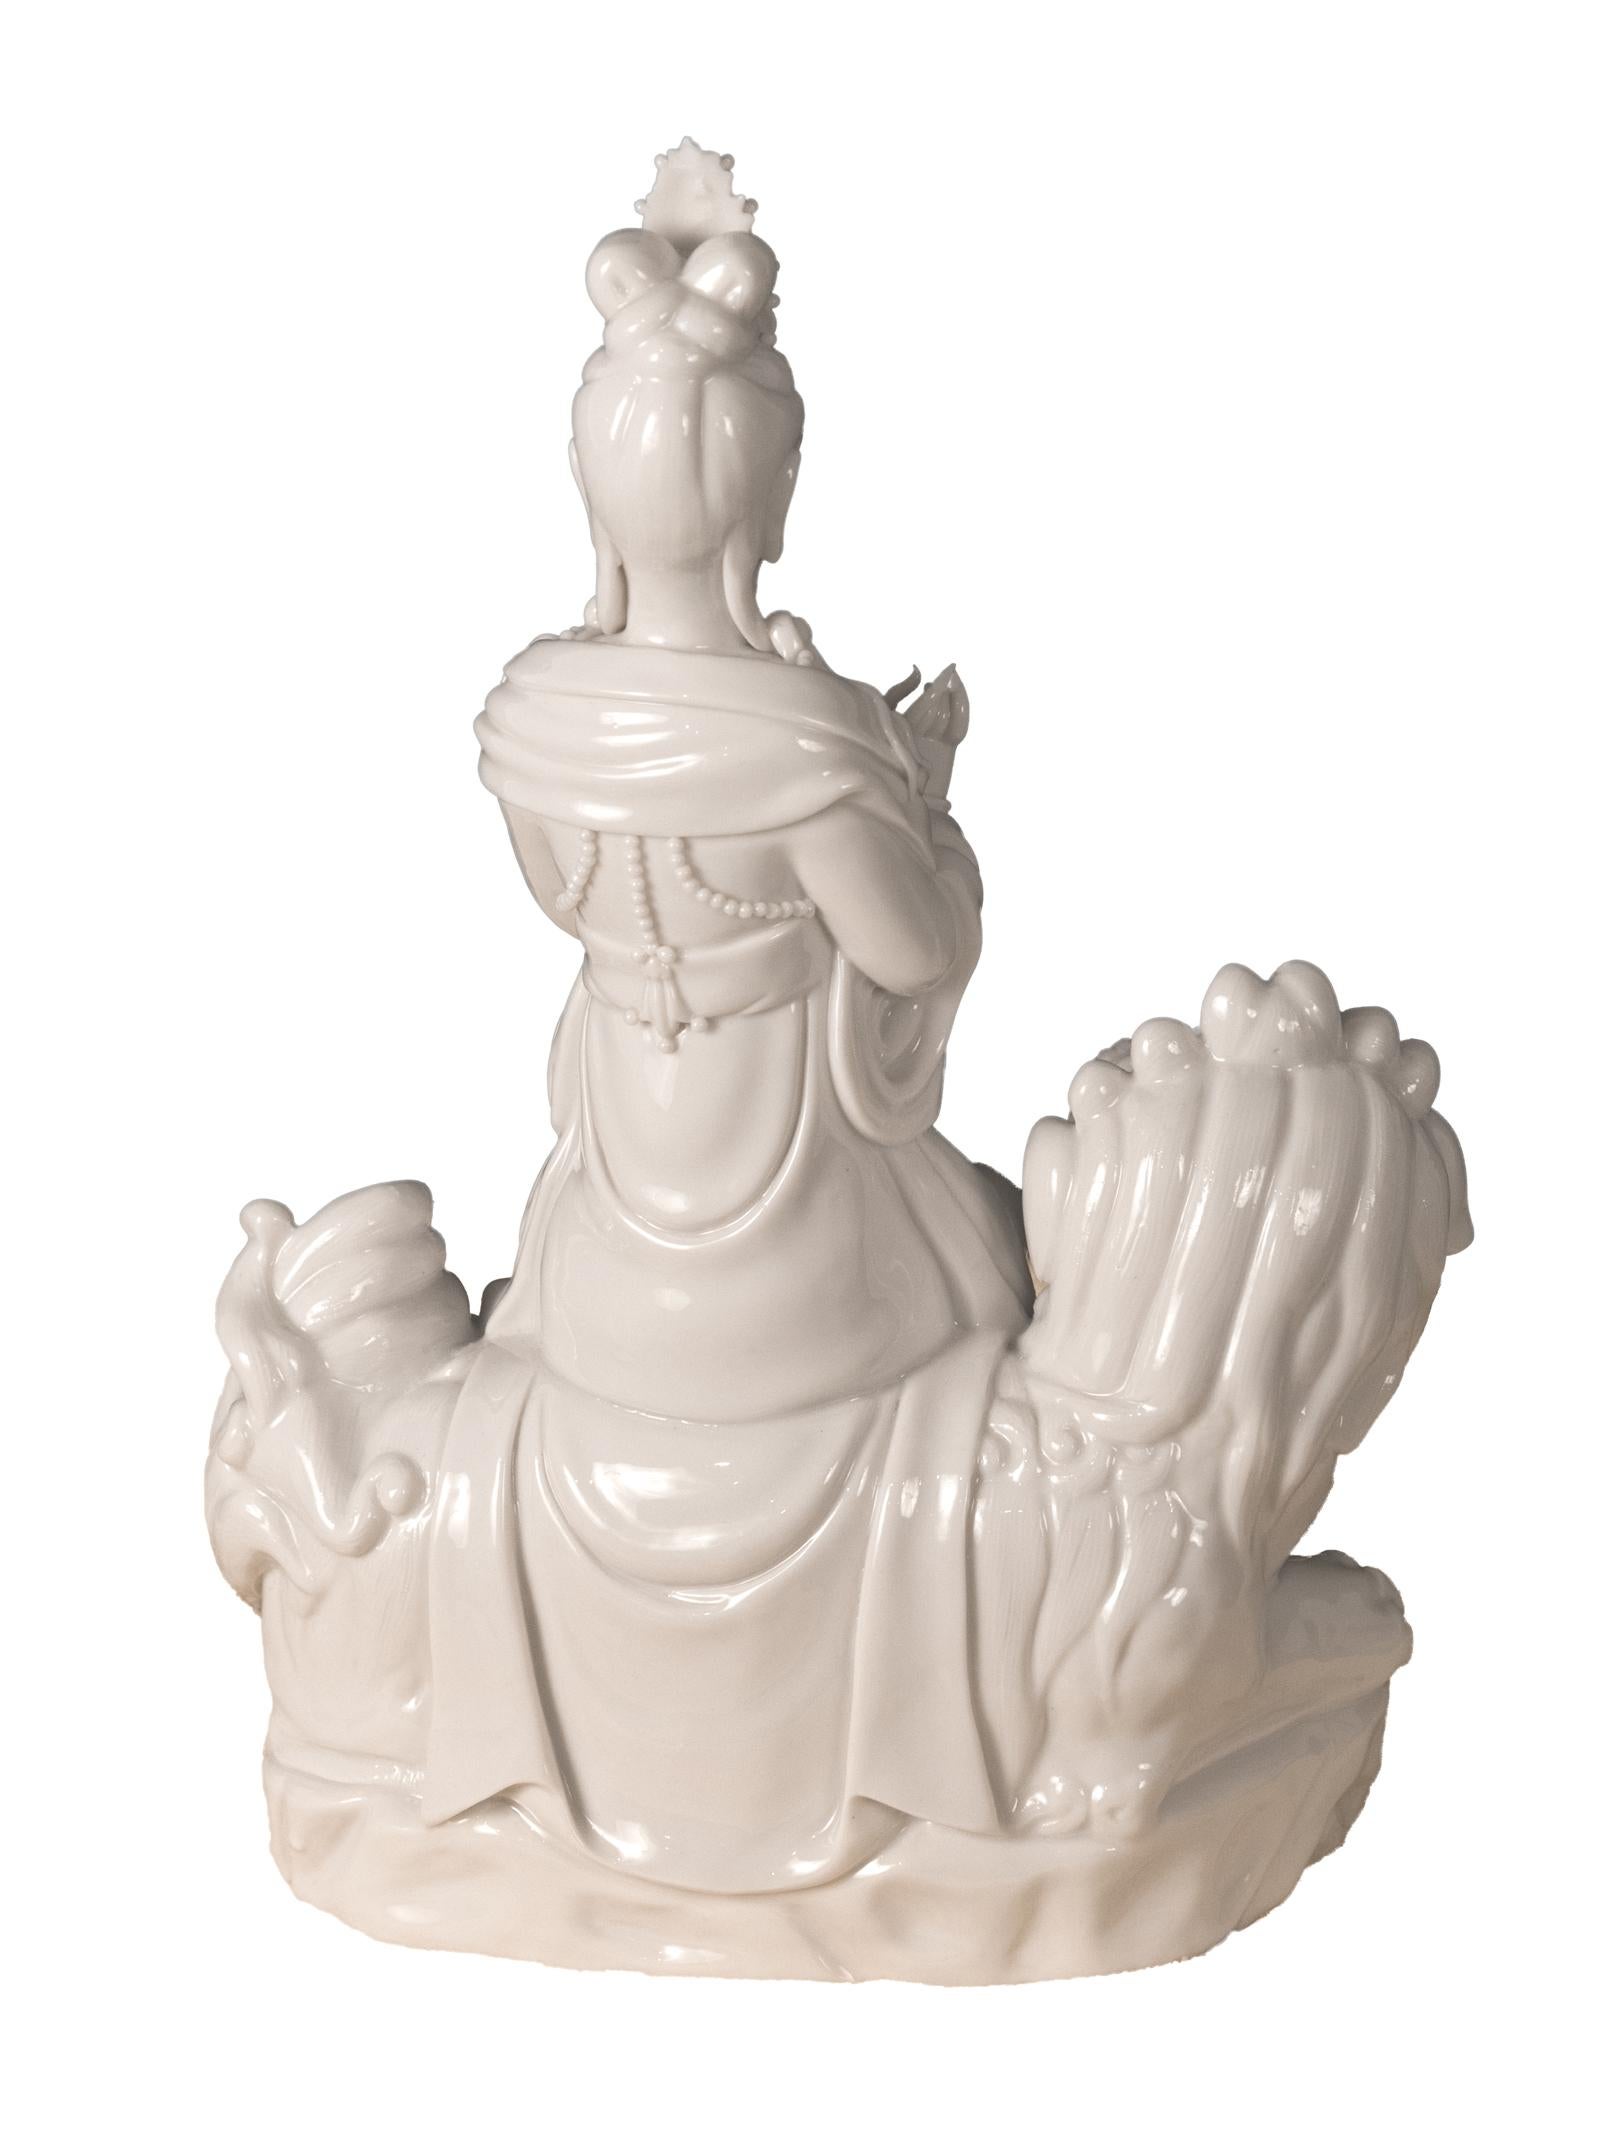 Chinese Blanc de Chine 'Dehua' Porcelain Figural Group of Quan Yin on Foo Dog or Temple